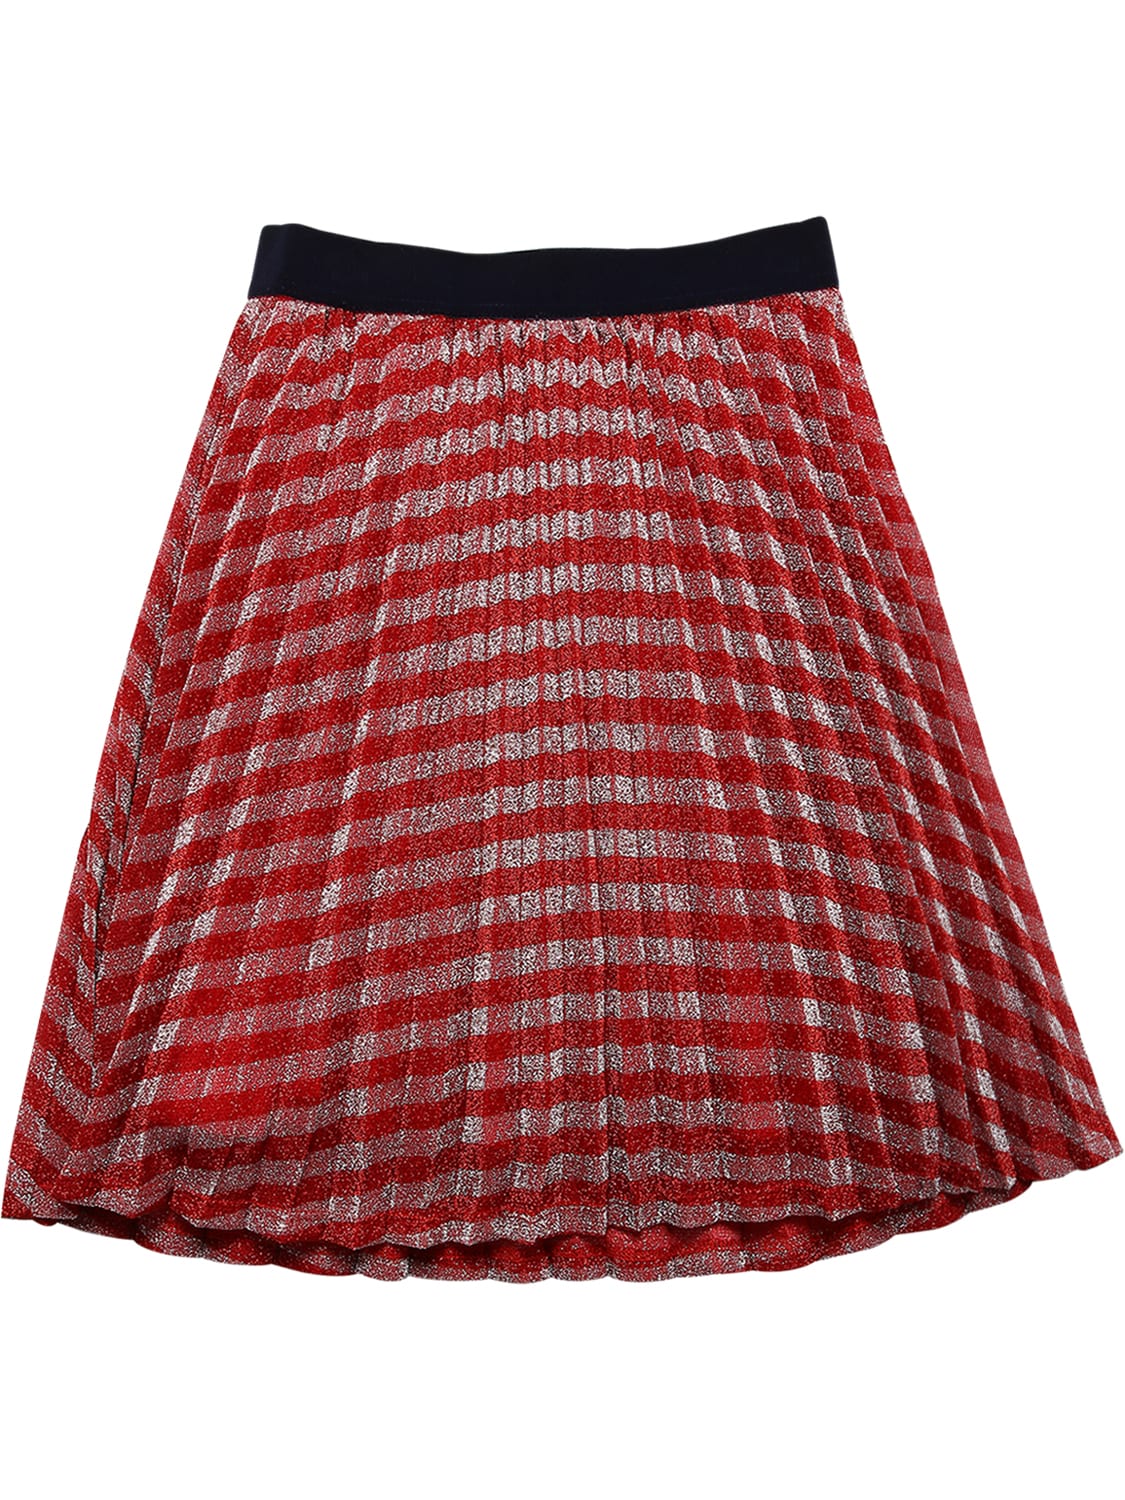 LITTLE MARC JACOBS PLEATED LUREX SKIRT,71IFGD062-WDC00